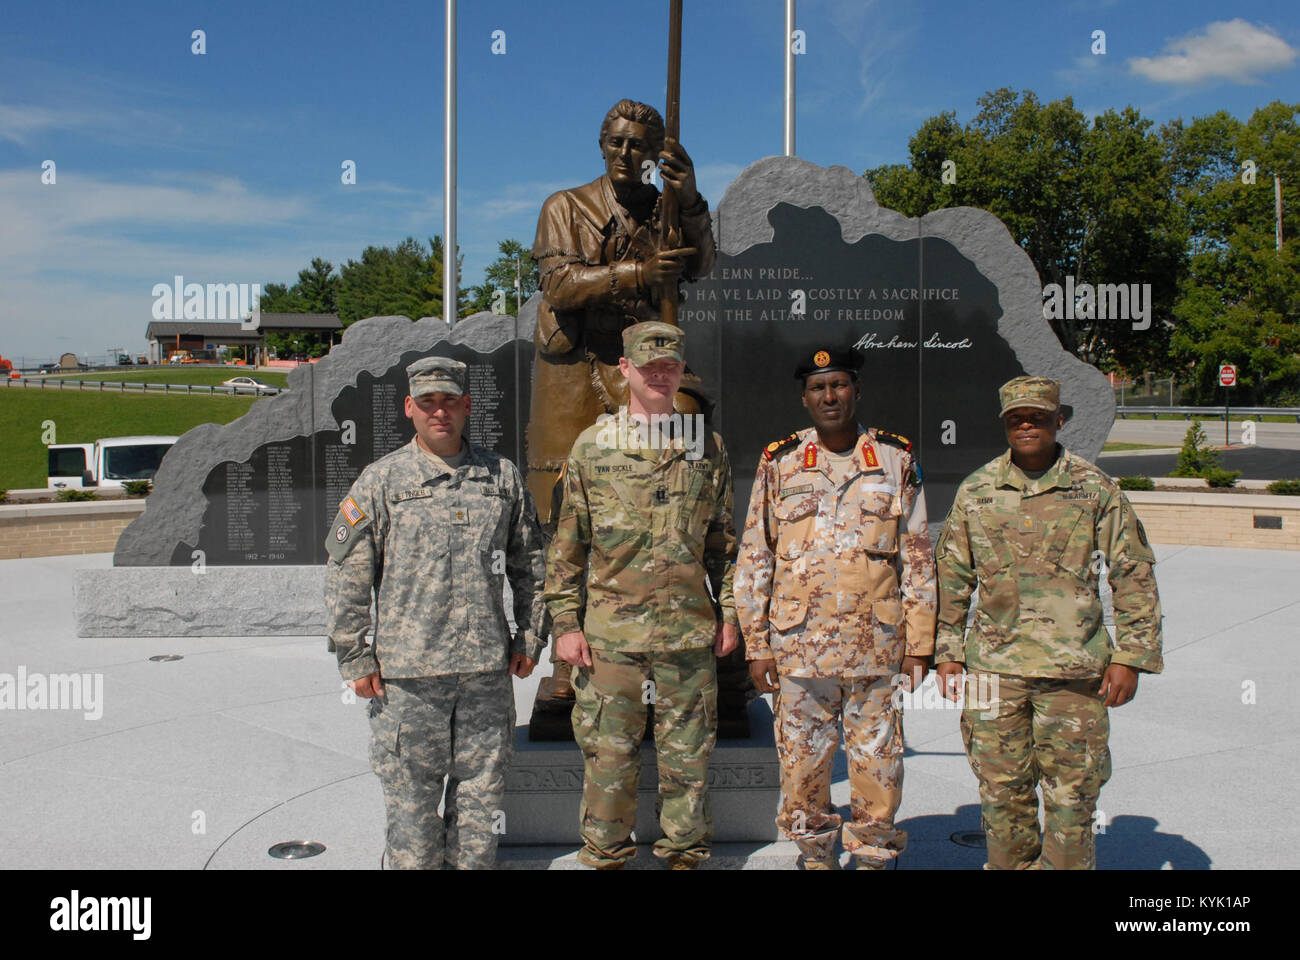 Members of the Djibouti military visits Soldiers of the Kentucky National Guard in Frankfort, Ky., August, 2016. (Photo by Capt. Aaron VanSickle) Stock Photo